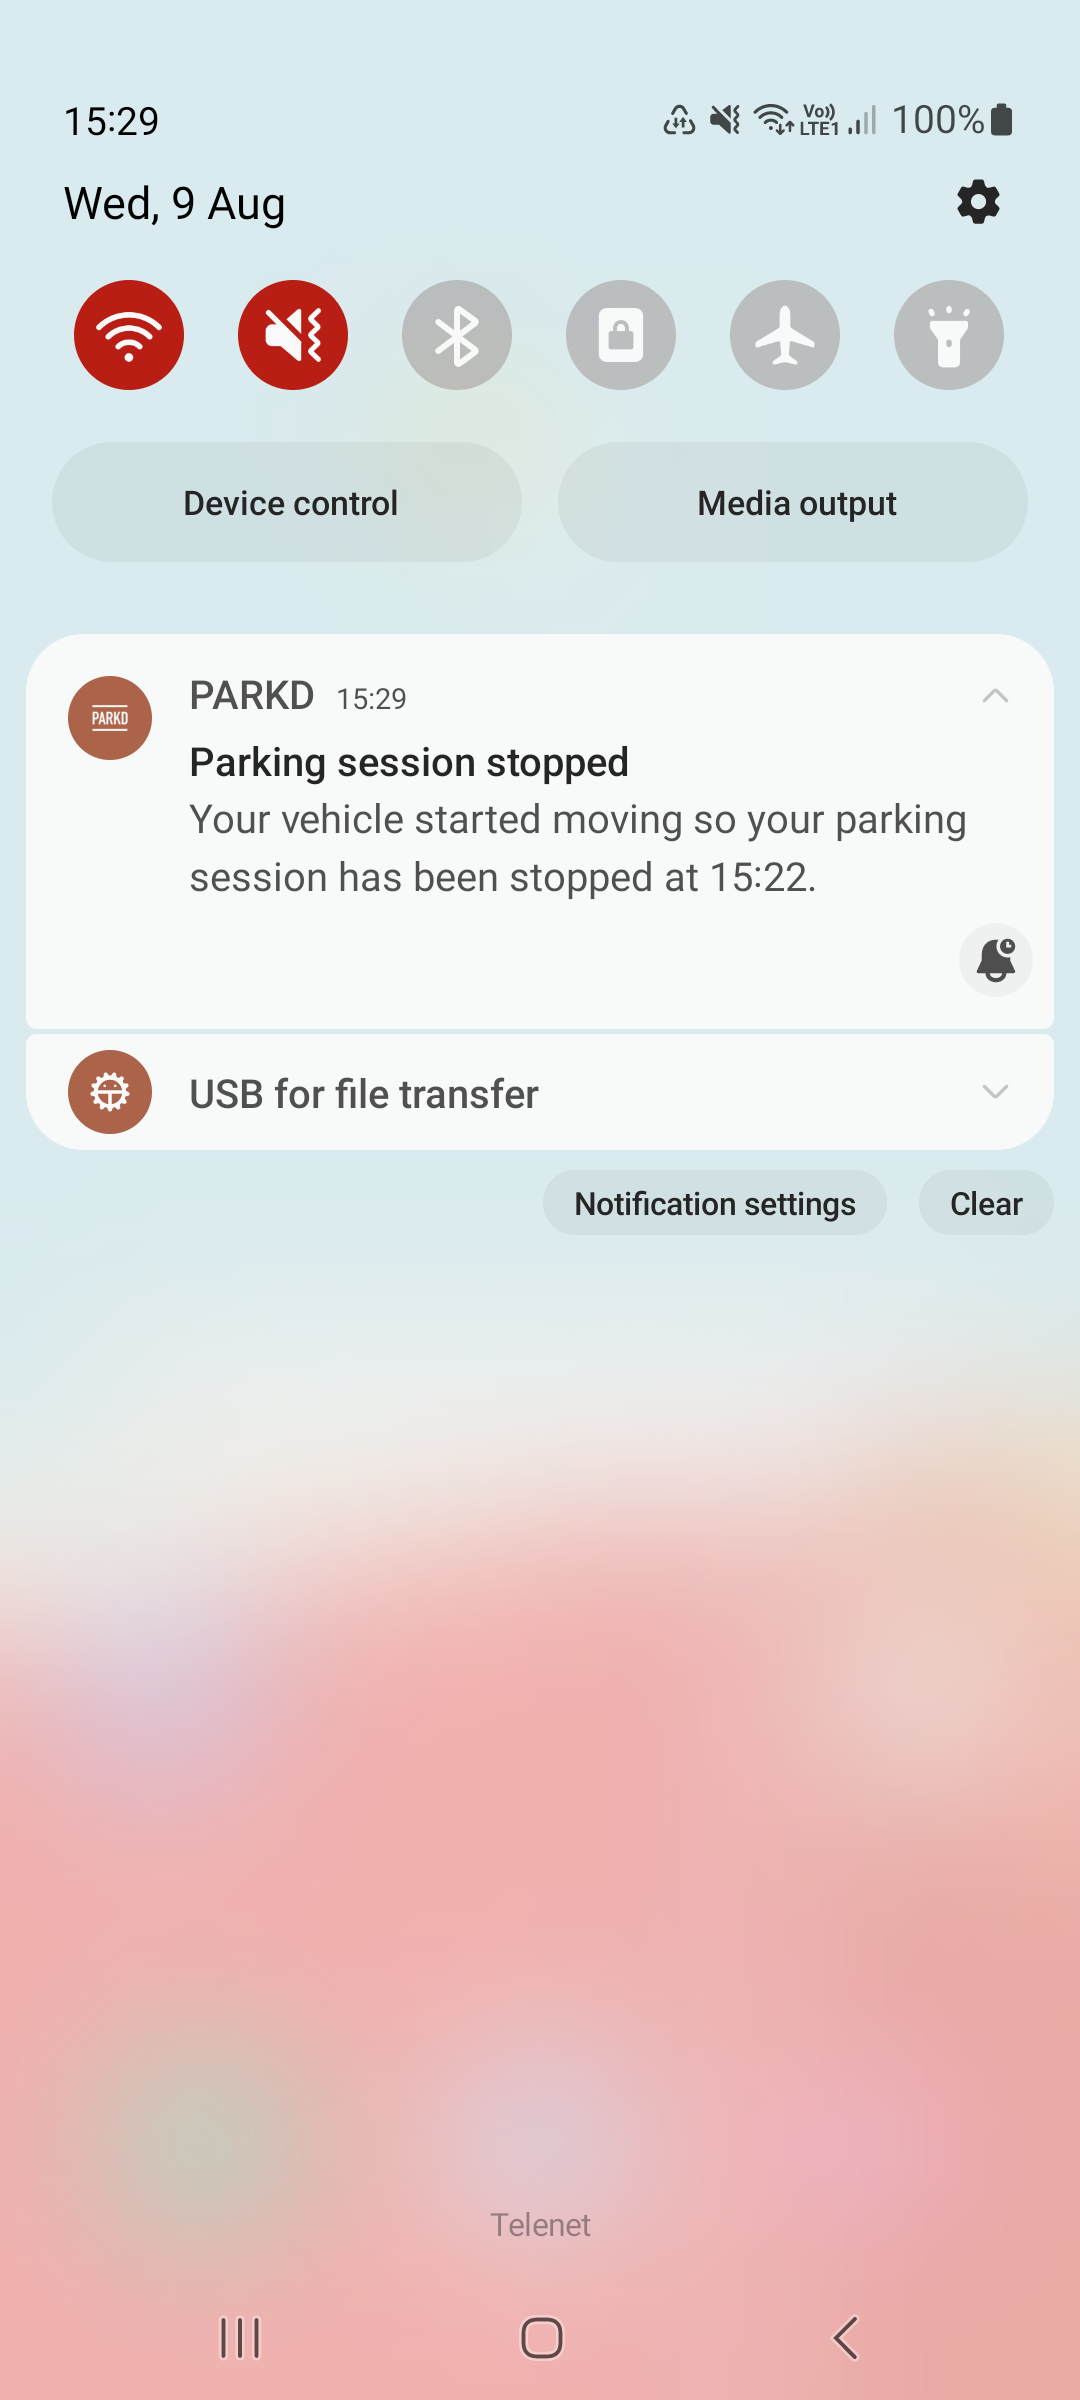 Parking session stopped